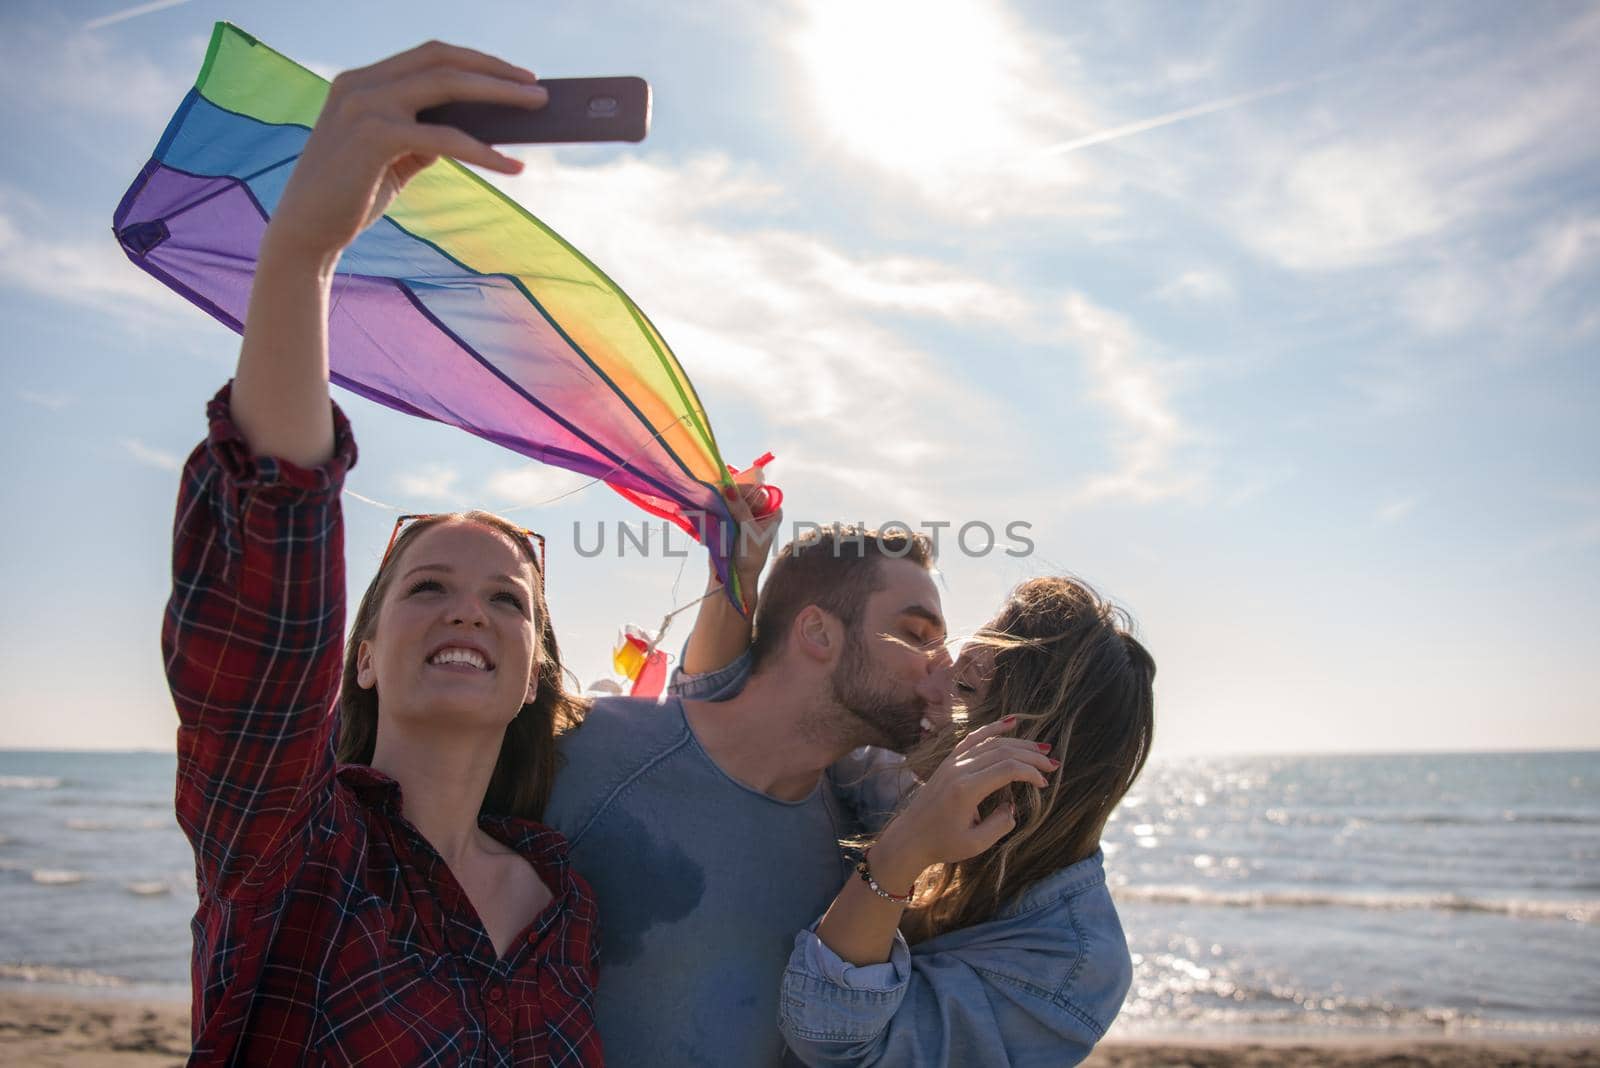 group of young friends making selfie while playing with kite on a beach during sunny autumn day